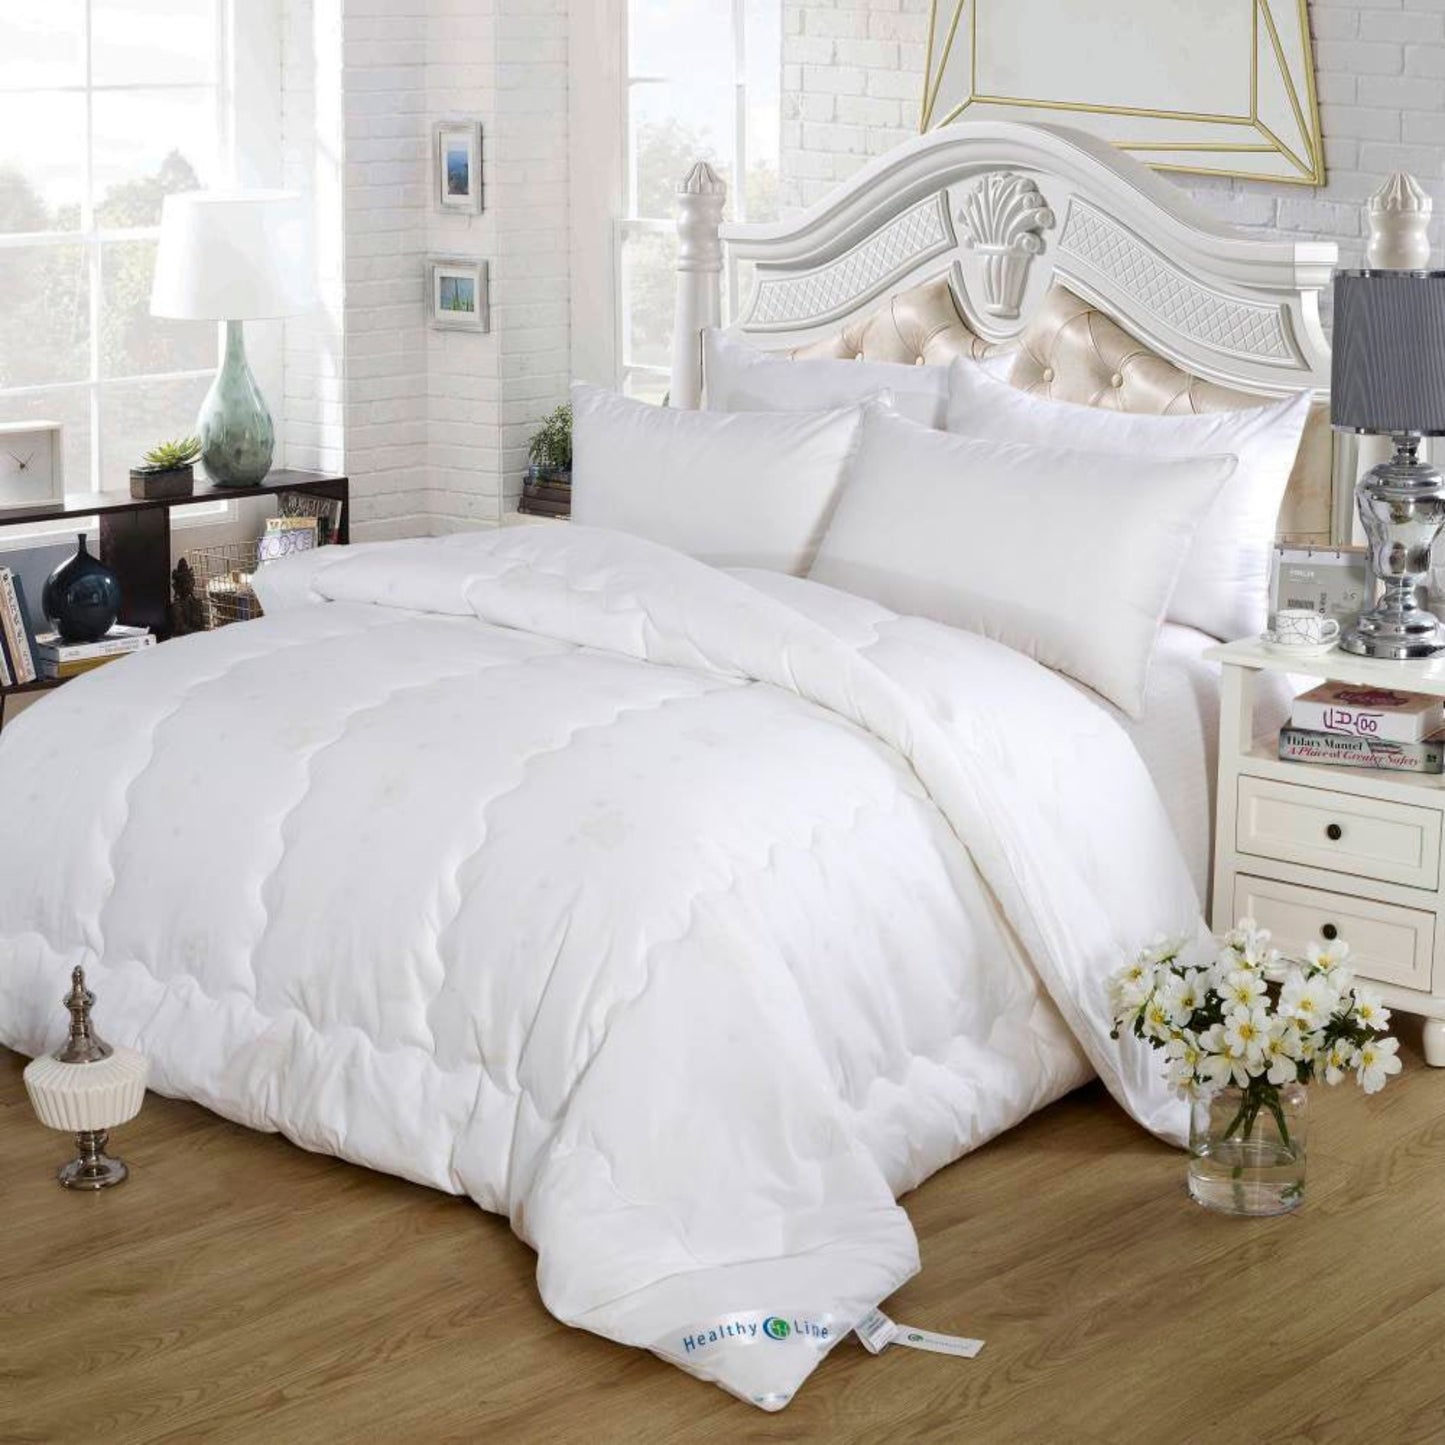 HealthyLine | Tourmaline Energy Comforter - Coton by HealthyLine - King / Duvet with NO Magnets